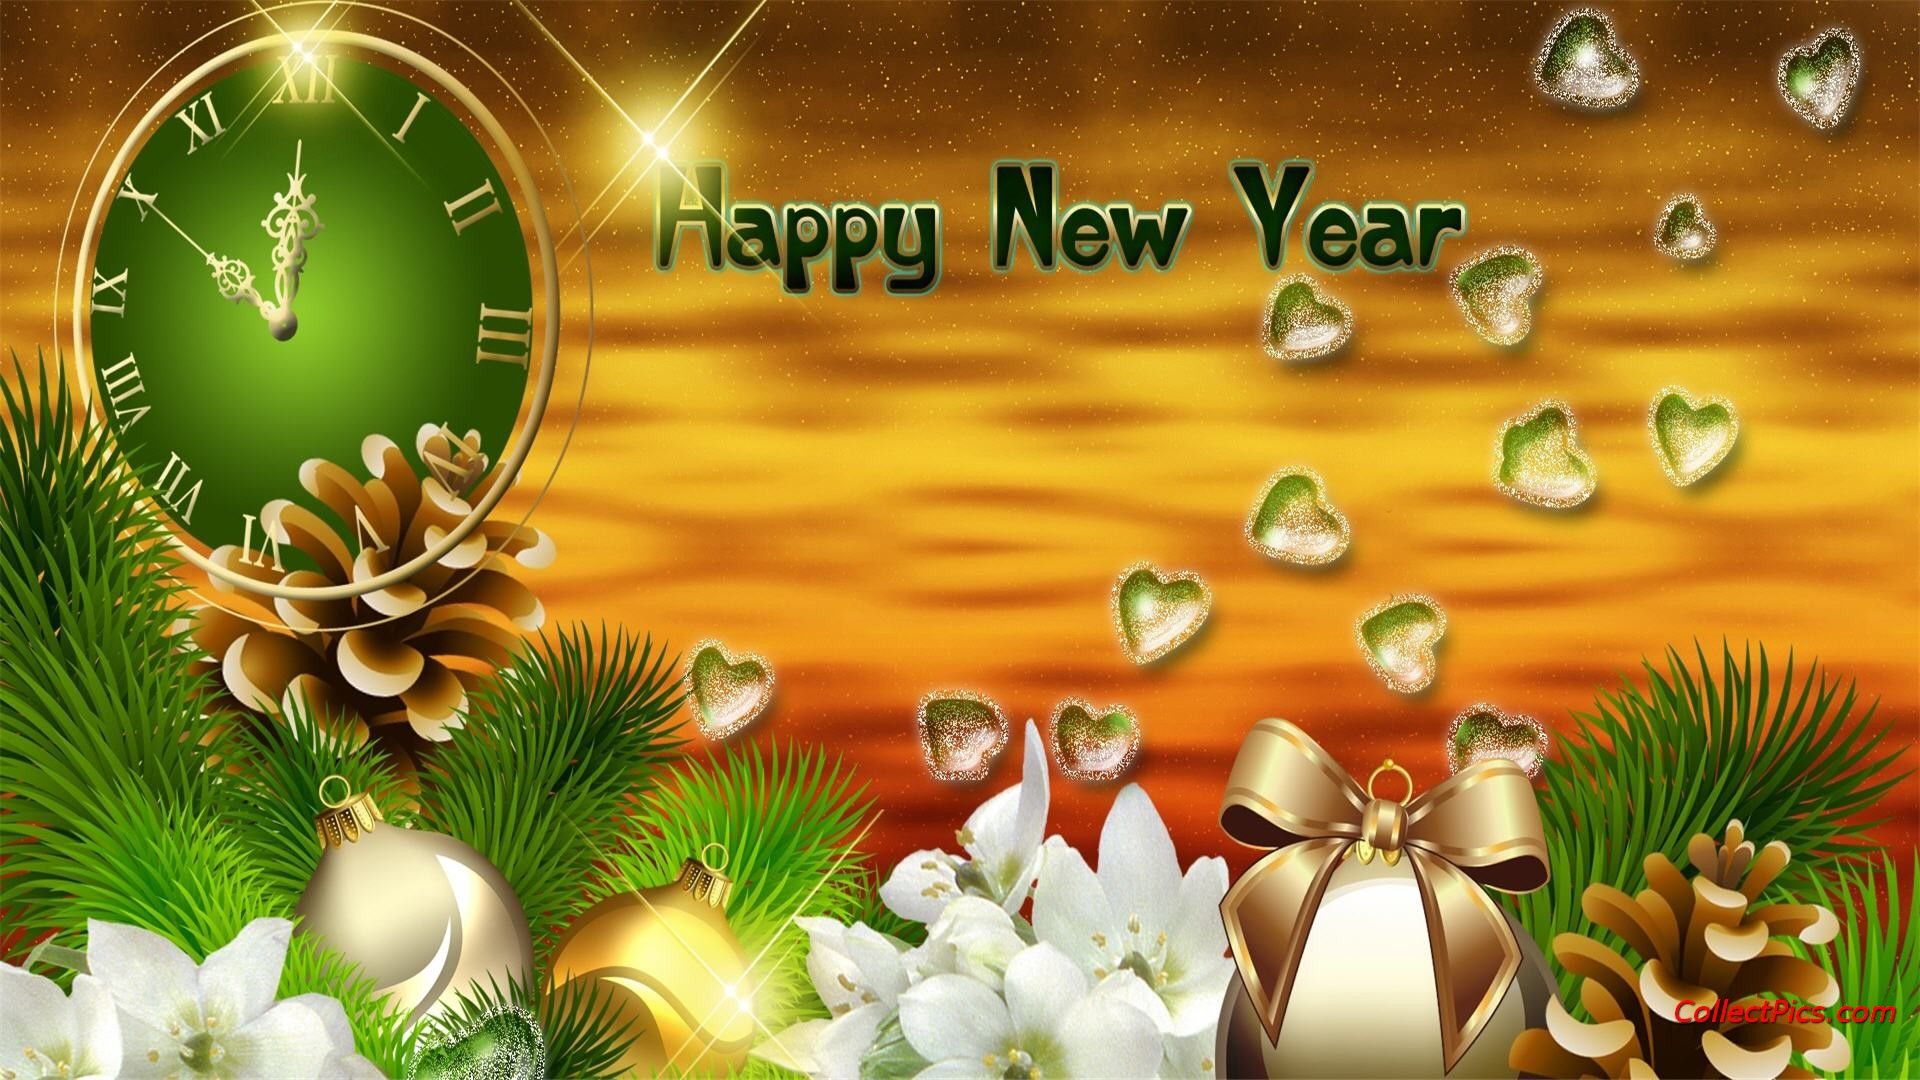 2016 free happy New Year wallpaper - images, photos, pictures, pics |